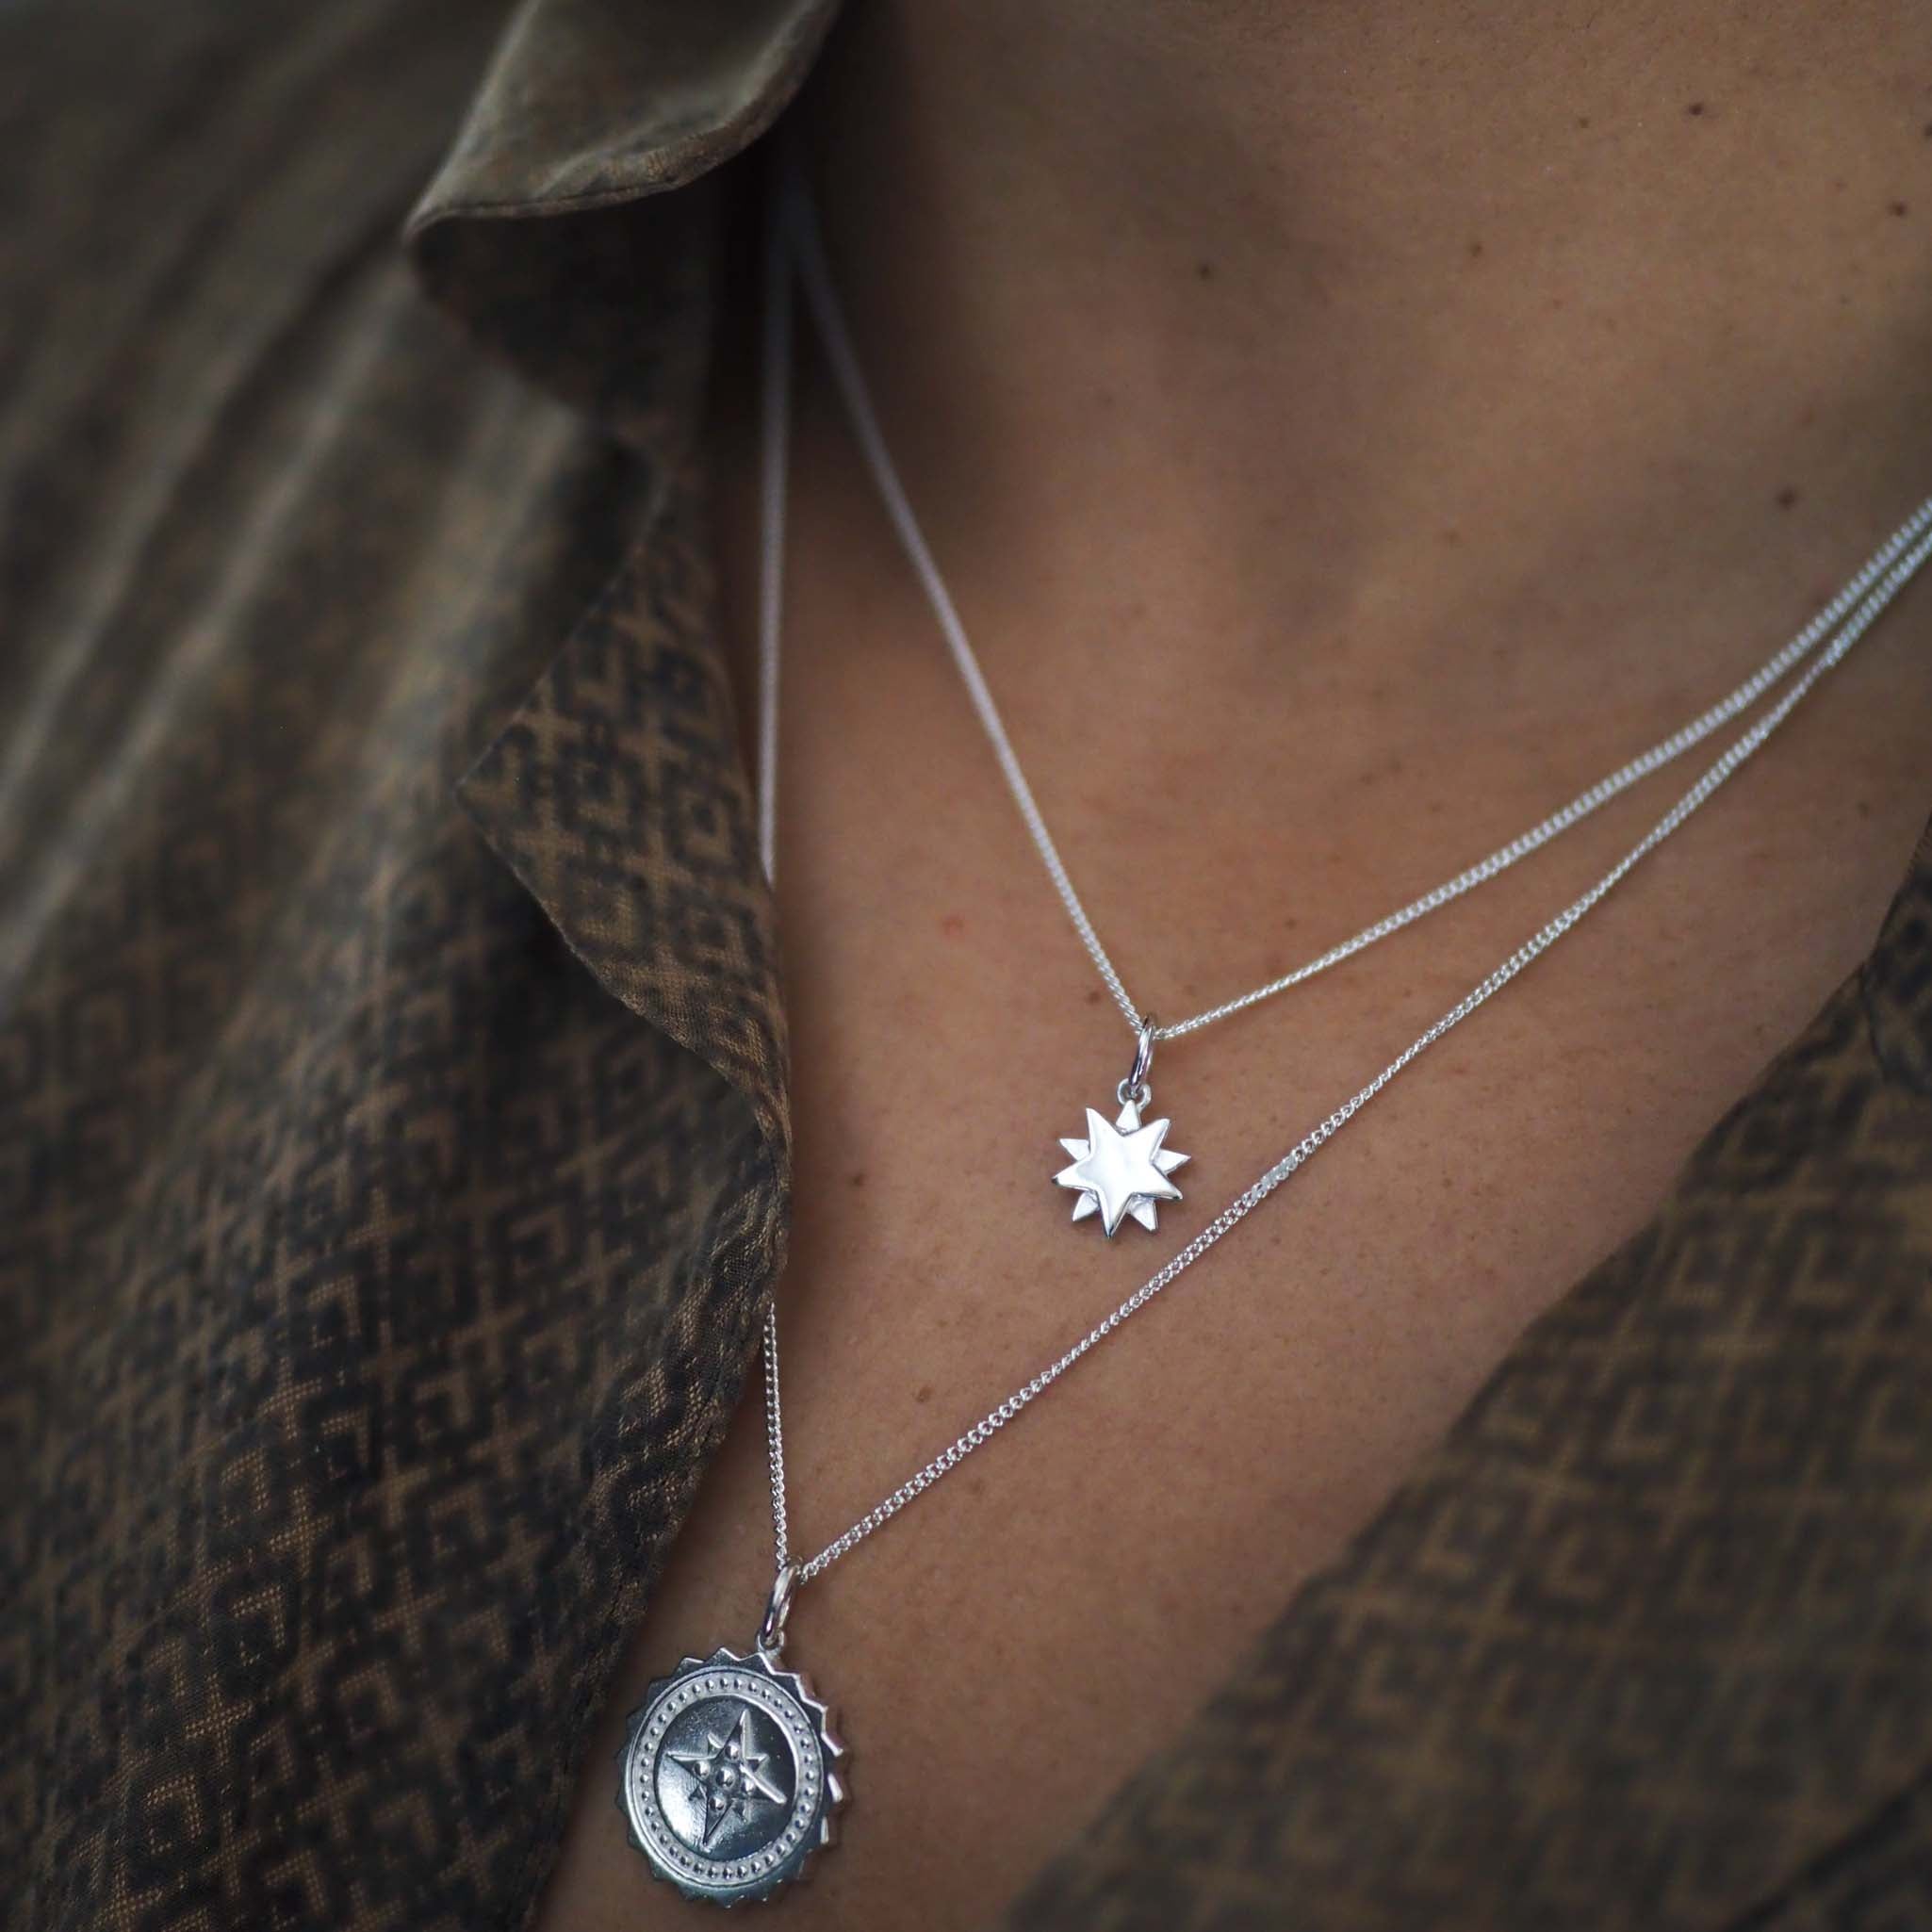 Bianca Jones Large Compass with Hand-Engraved Initial - Personalised Gold or Silver Pendant Image